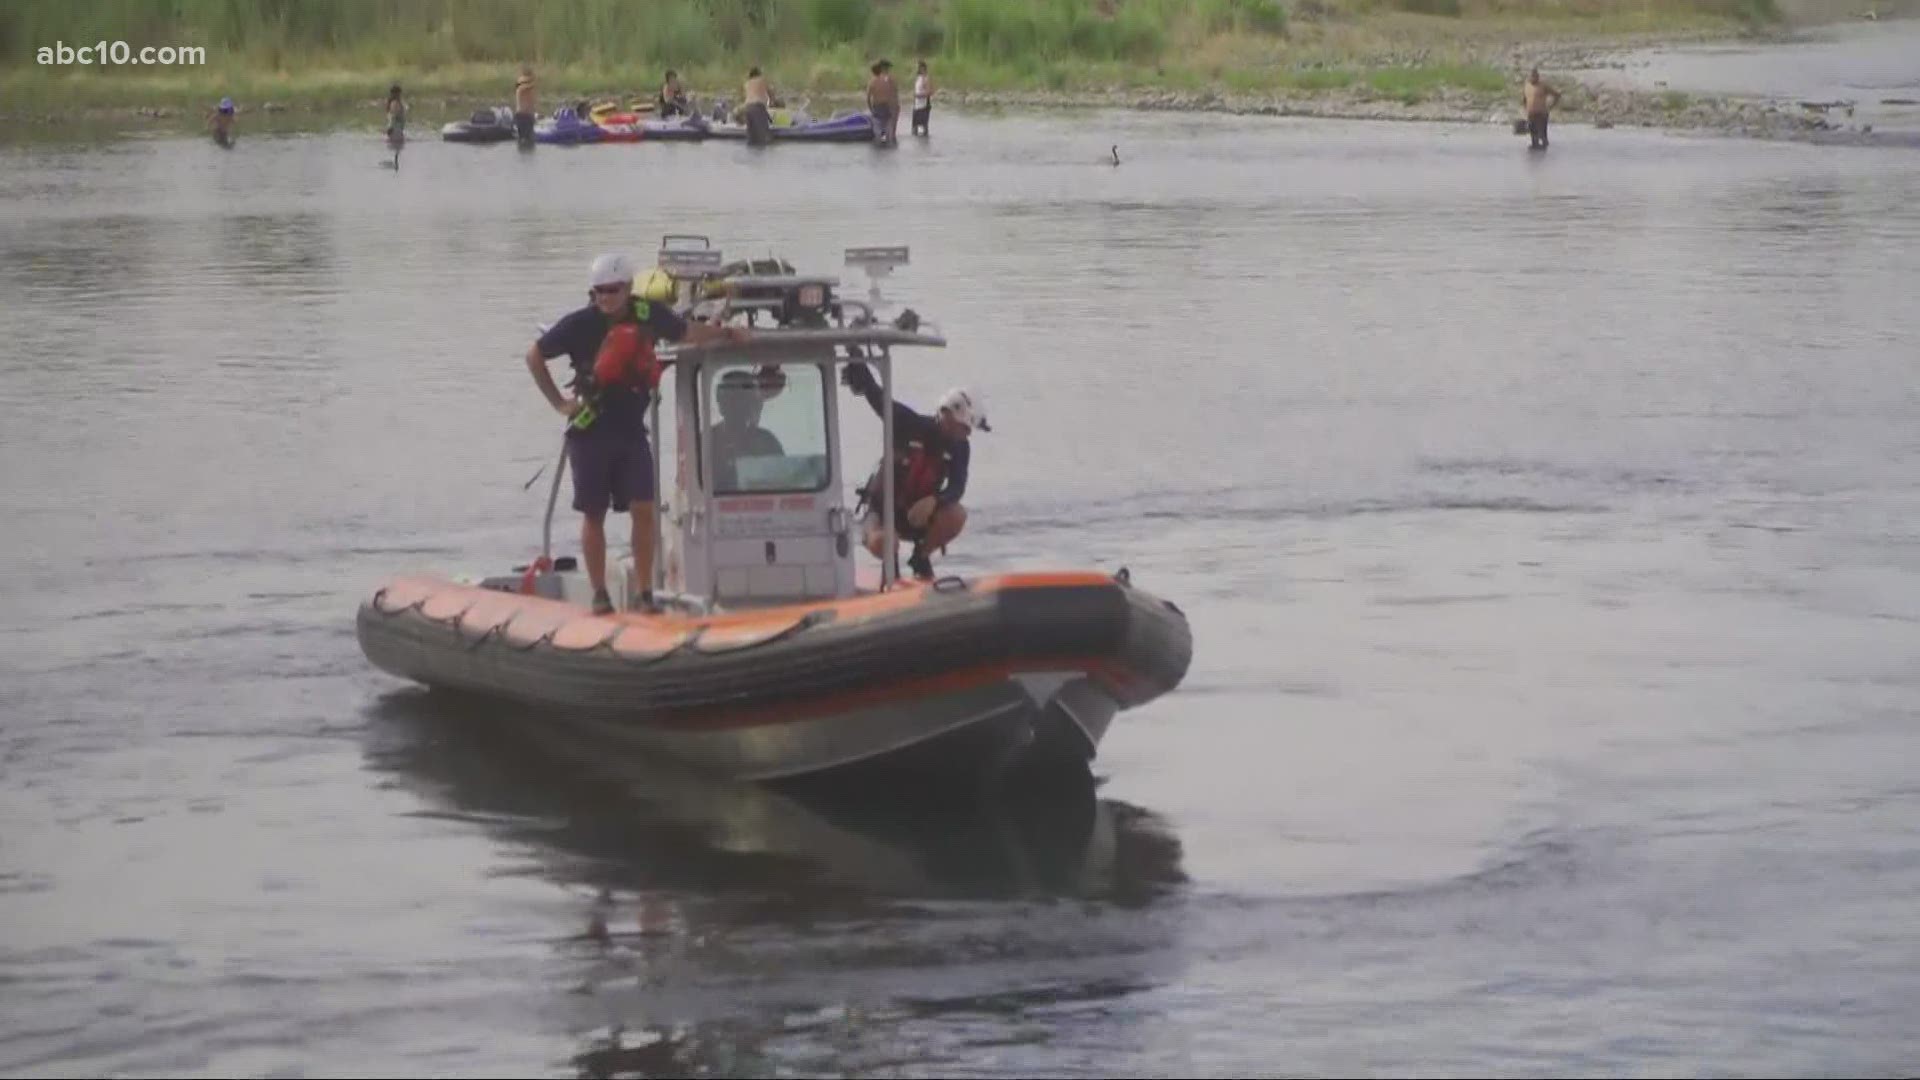 Officials are urging people to be cautious when swimming in Sacramento's waterways.